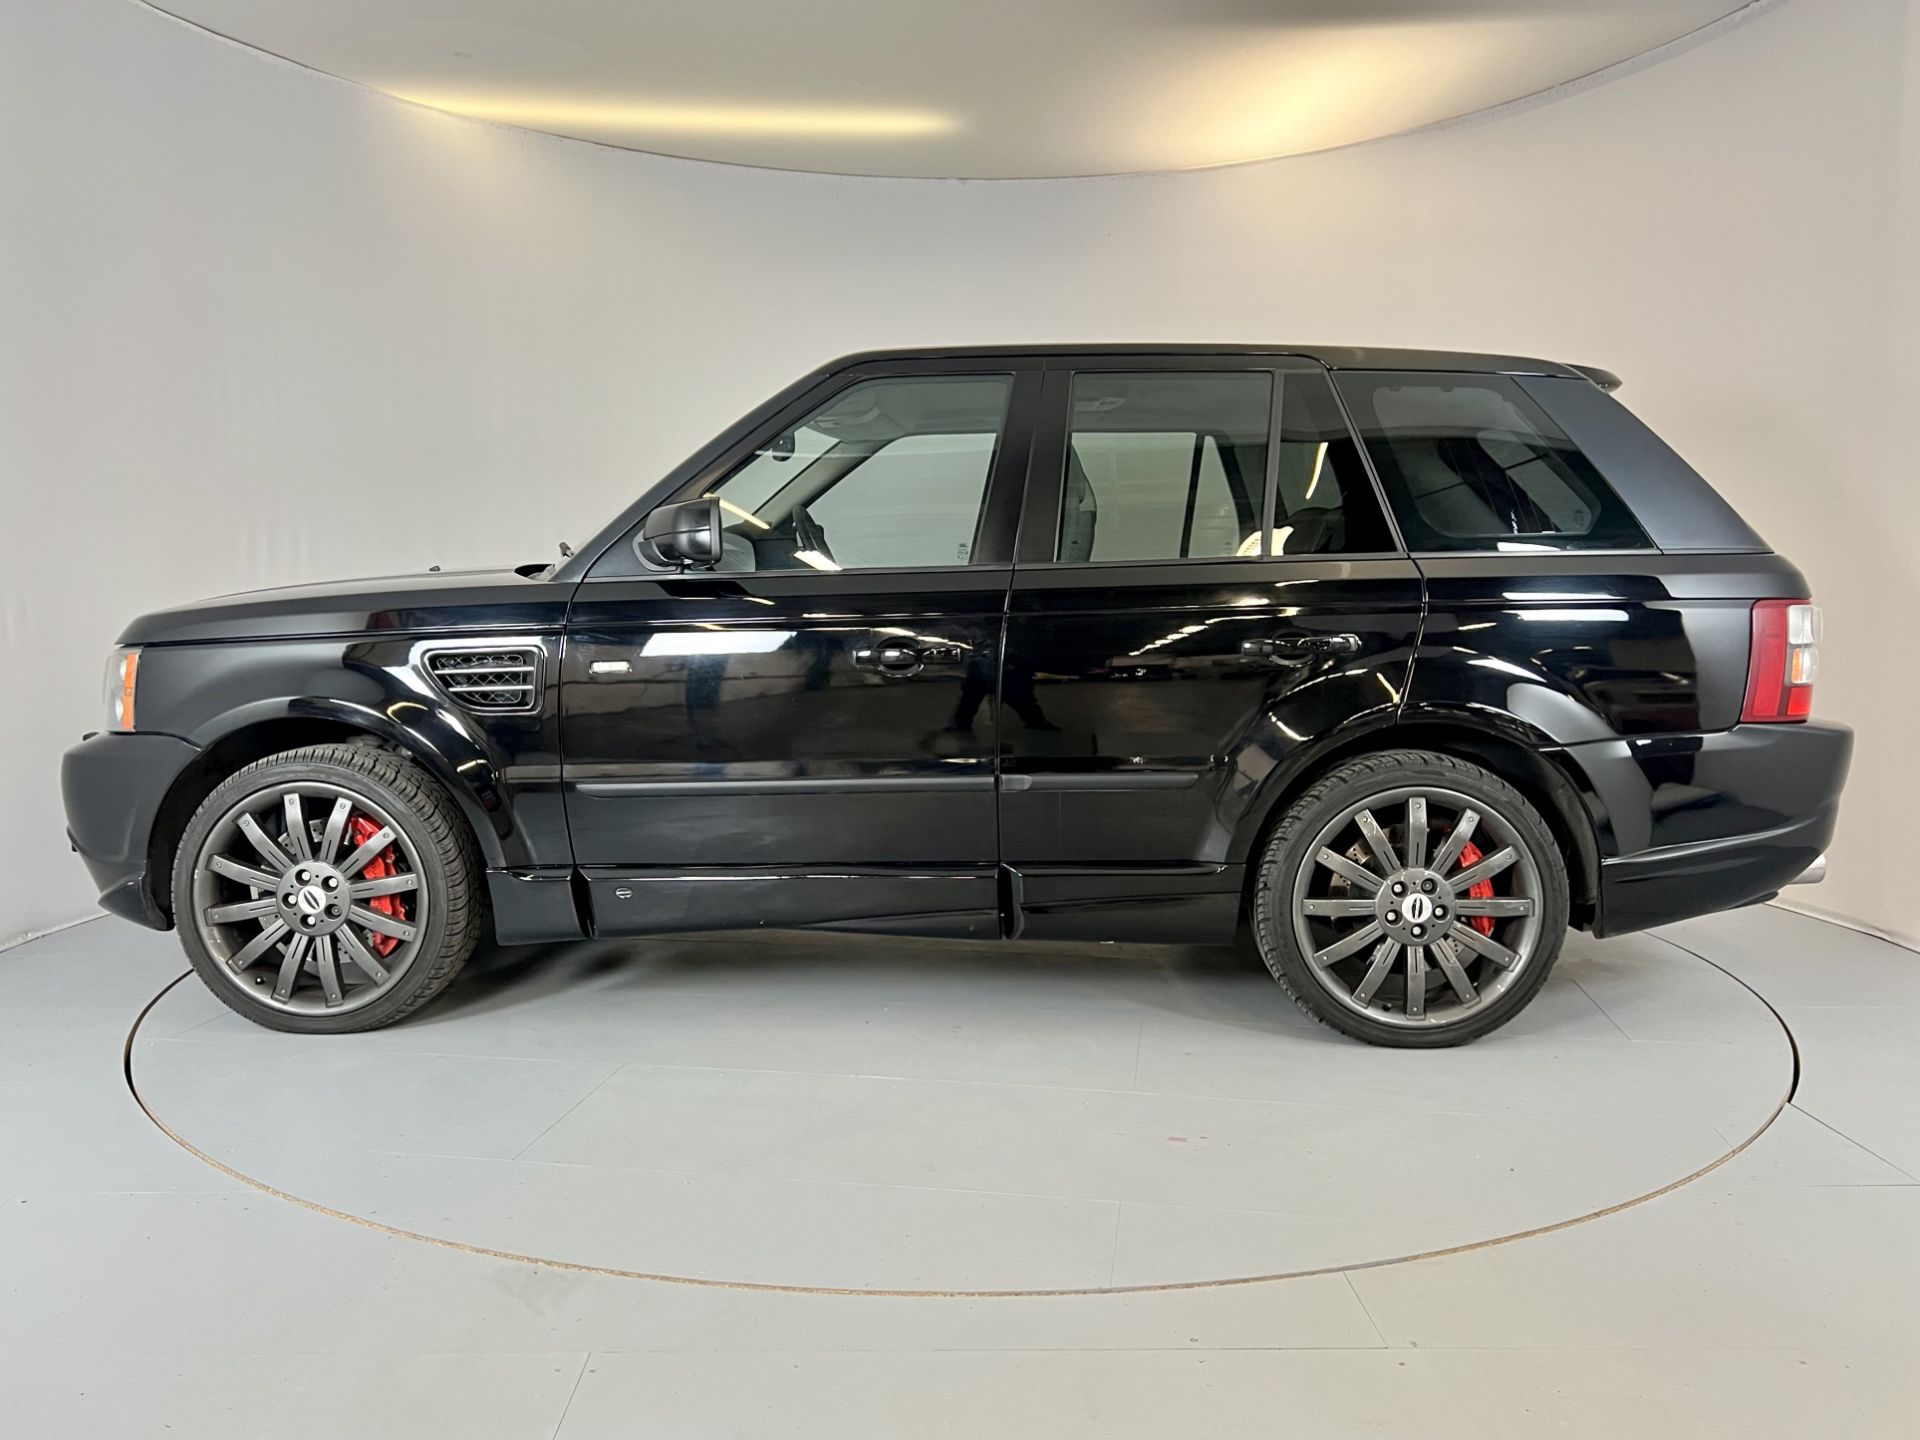 Range Rover Sport 1st Edition 4.2 Supercharged OverFinch - Image 5 of 33